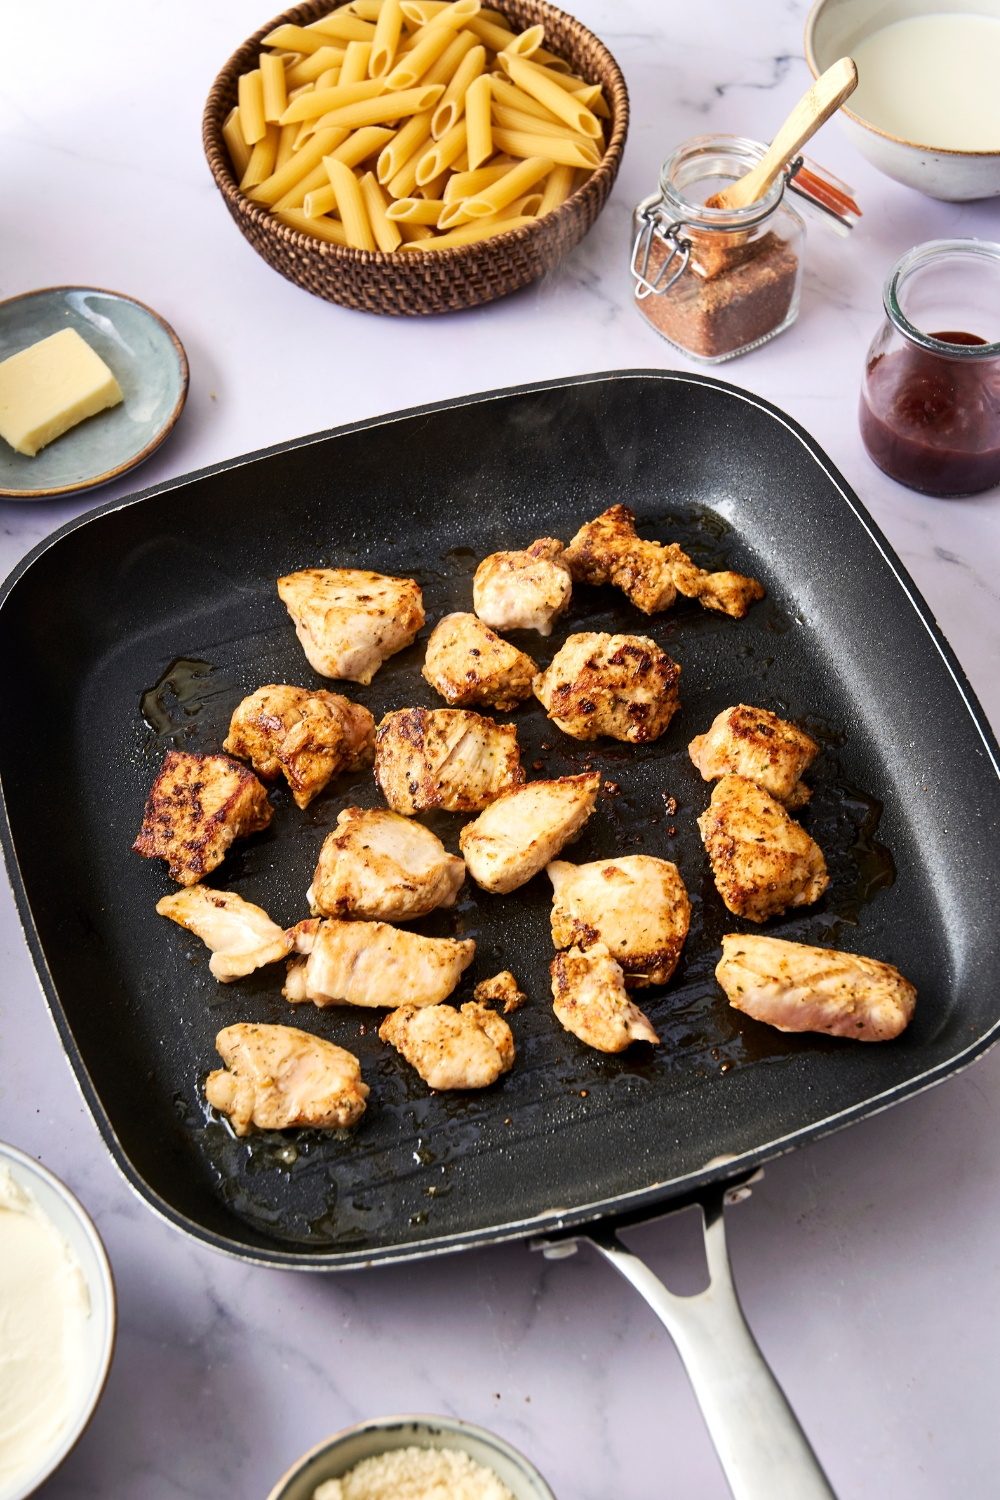 A square grill pan is full of diced and seasoned chicken breast.